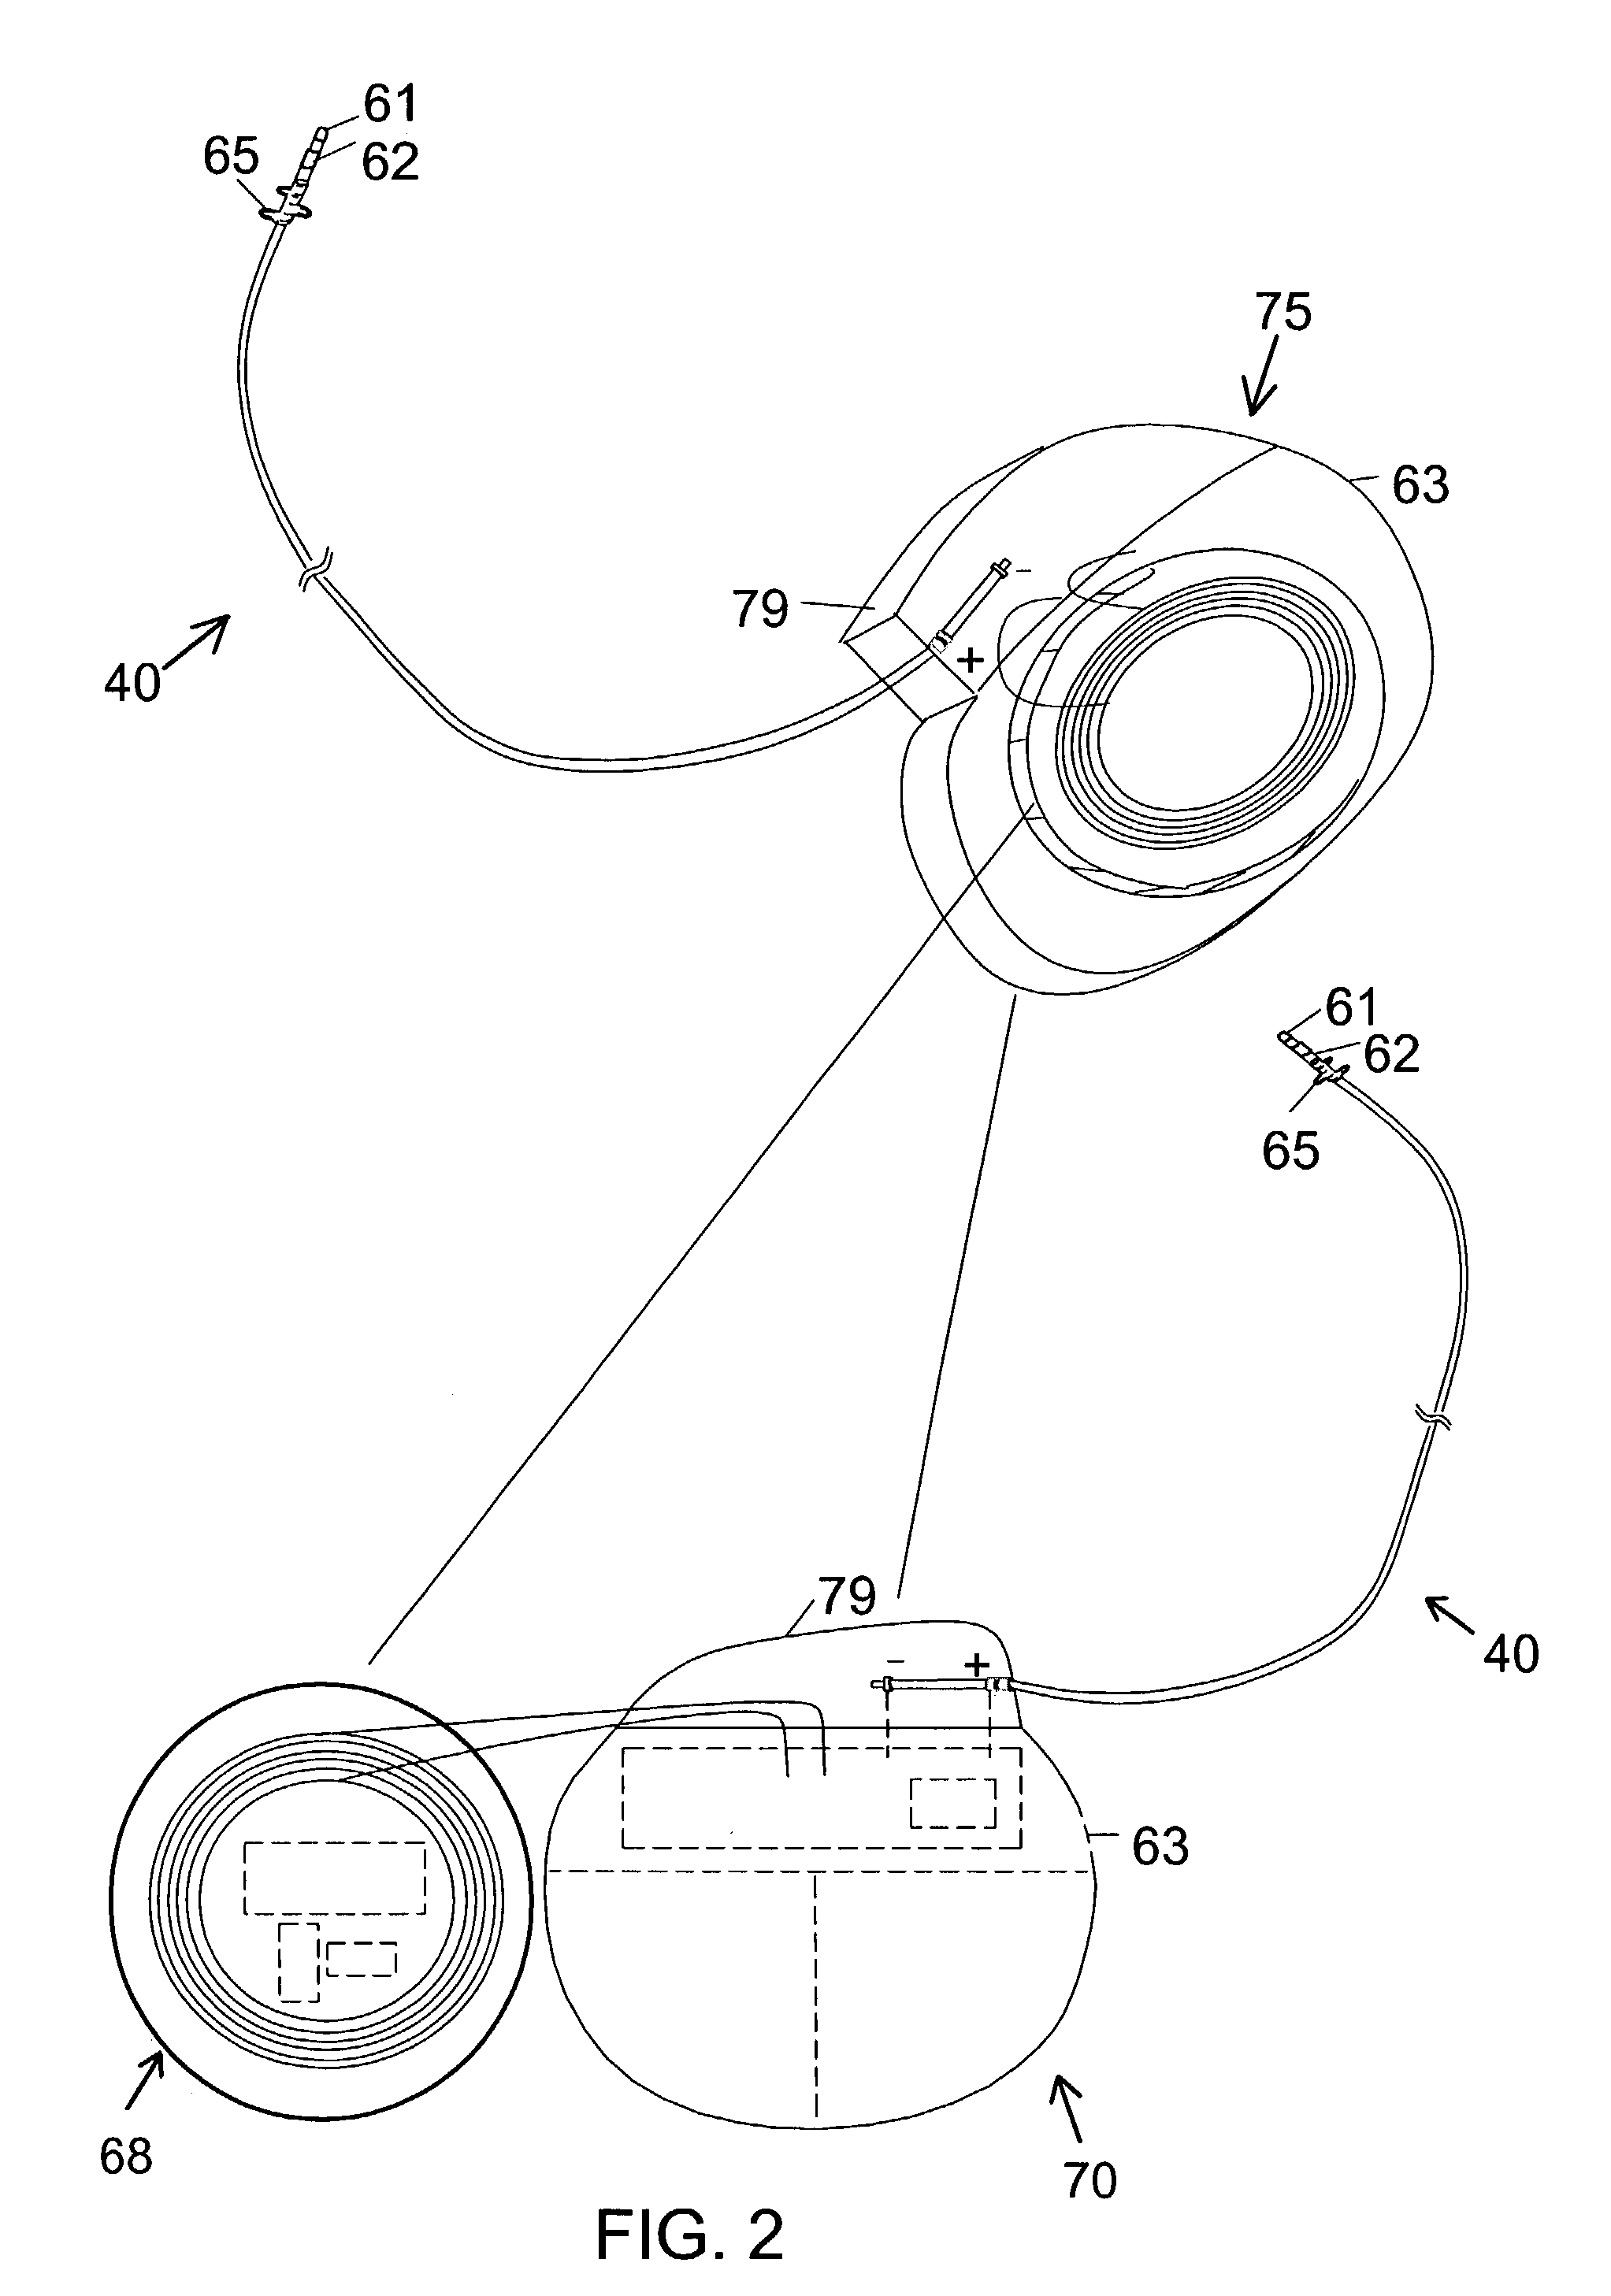 Method and system for providing pulsed electrical stimulation to sacral plexus of a patient to provide therapy for urinary incontinence and urological disorders